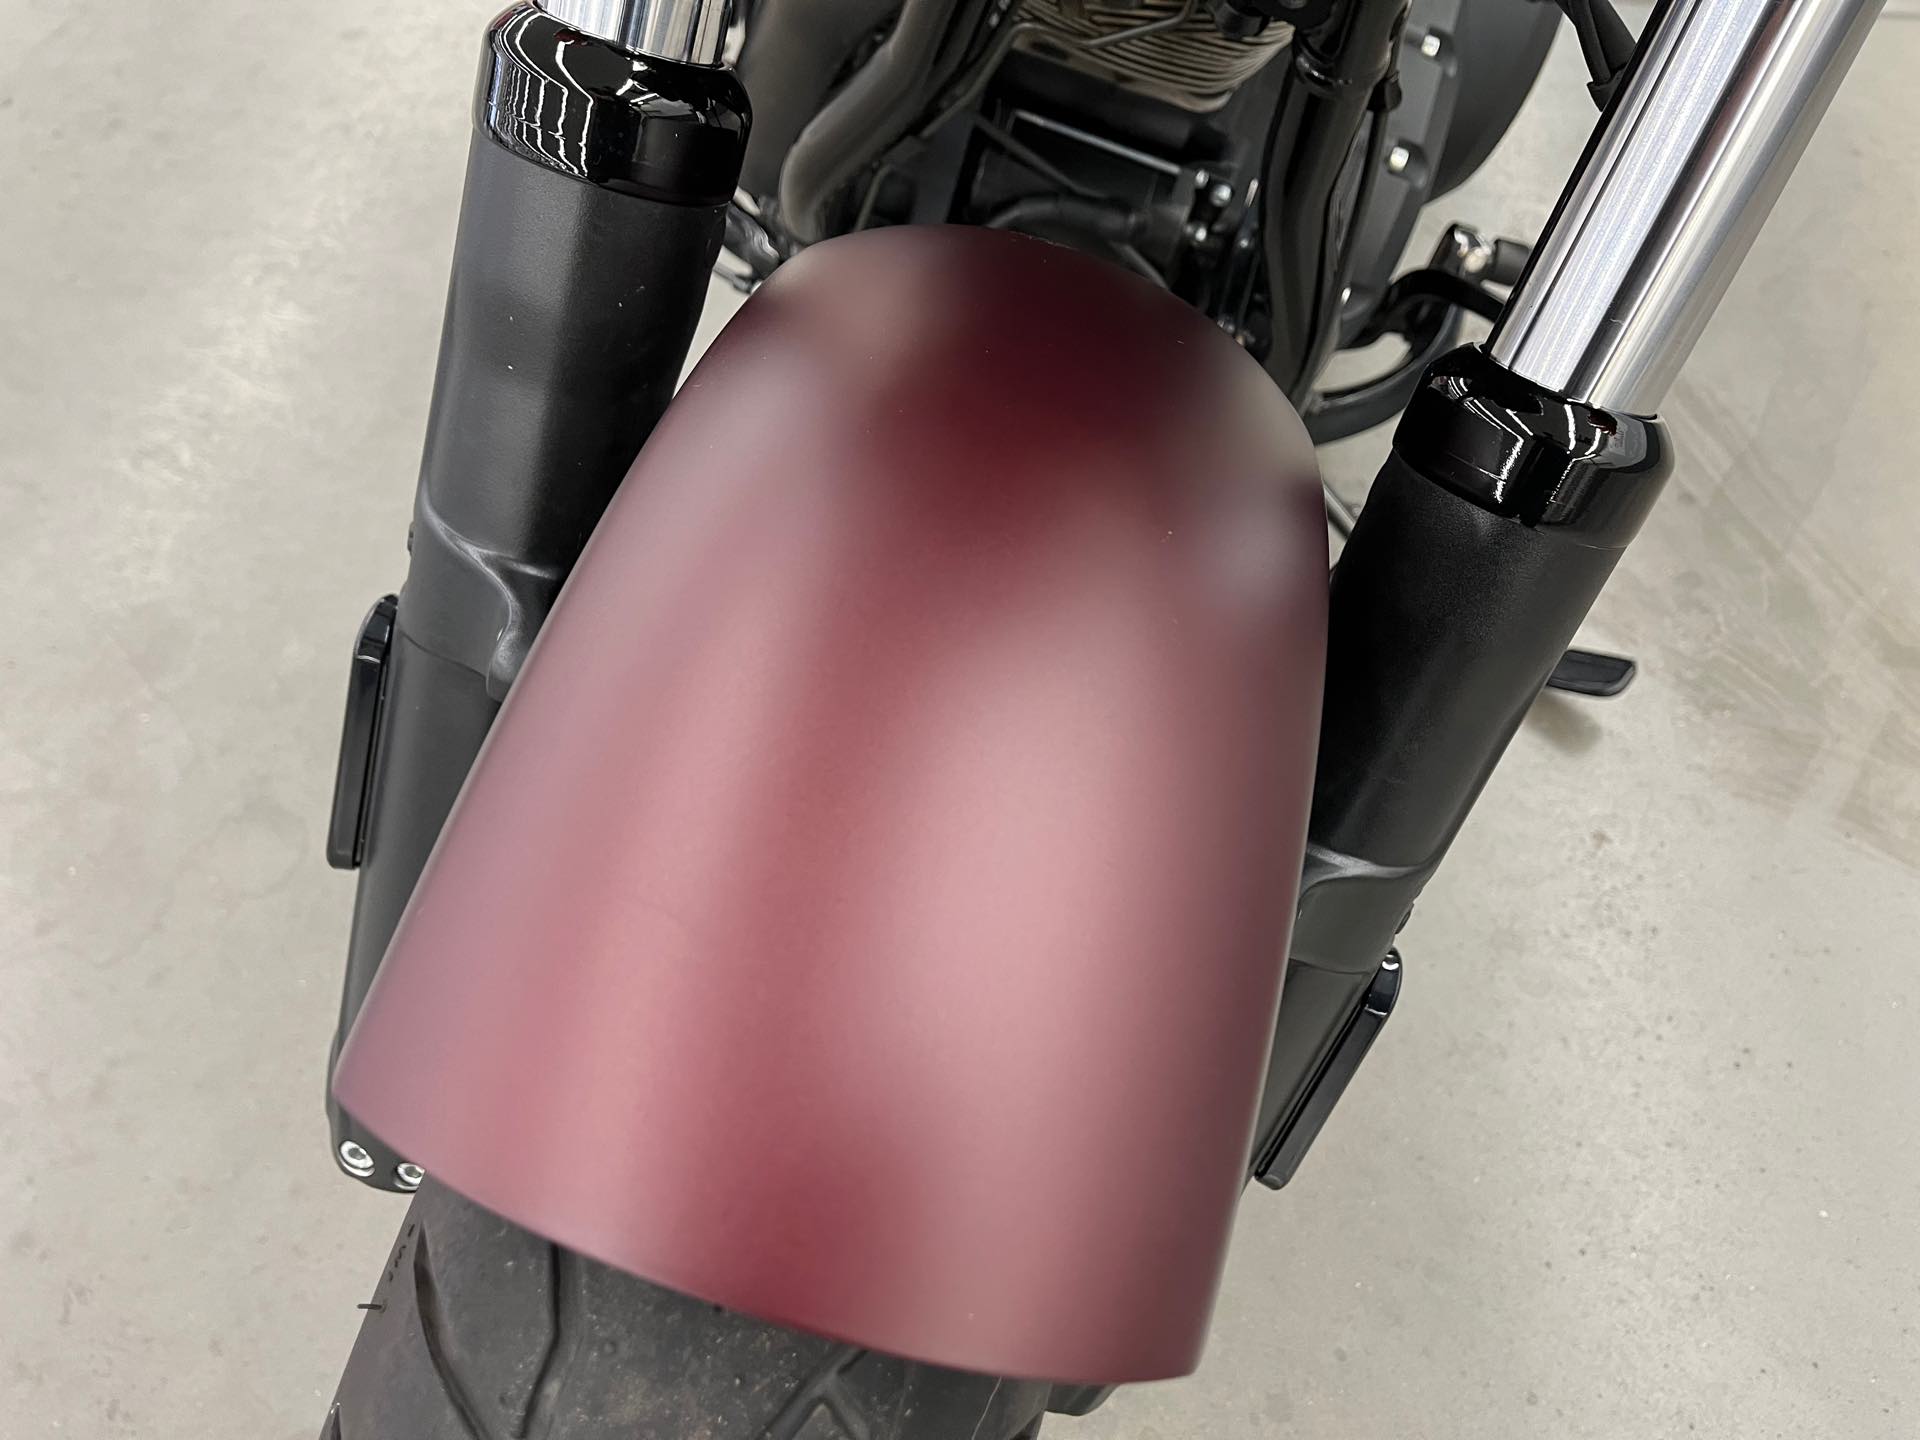 2023 Indian Motorcycle Chief Base at Aces Motorcycles - Denver